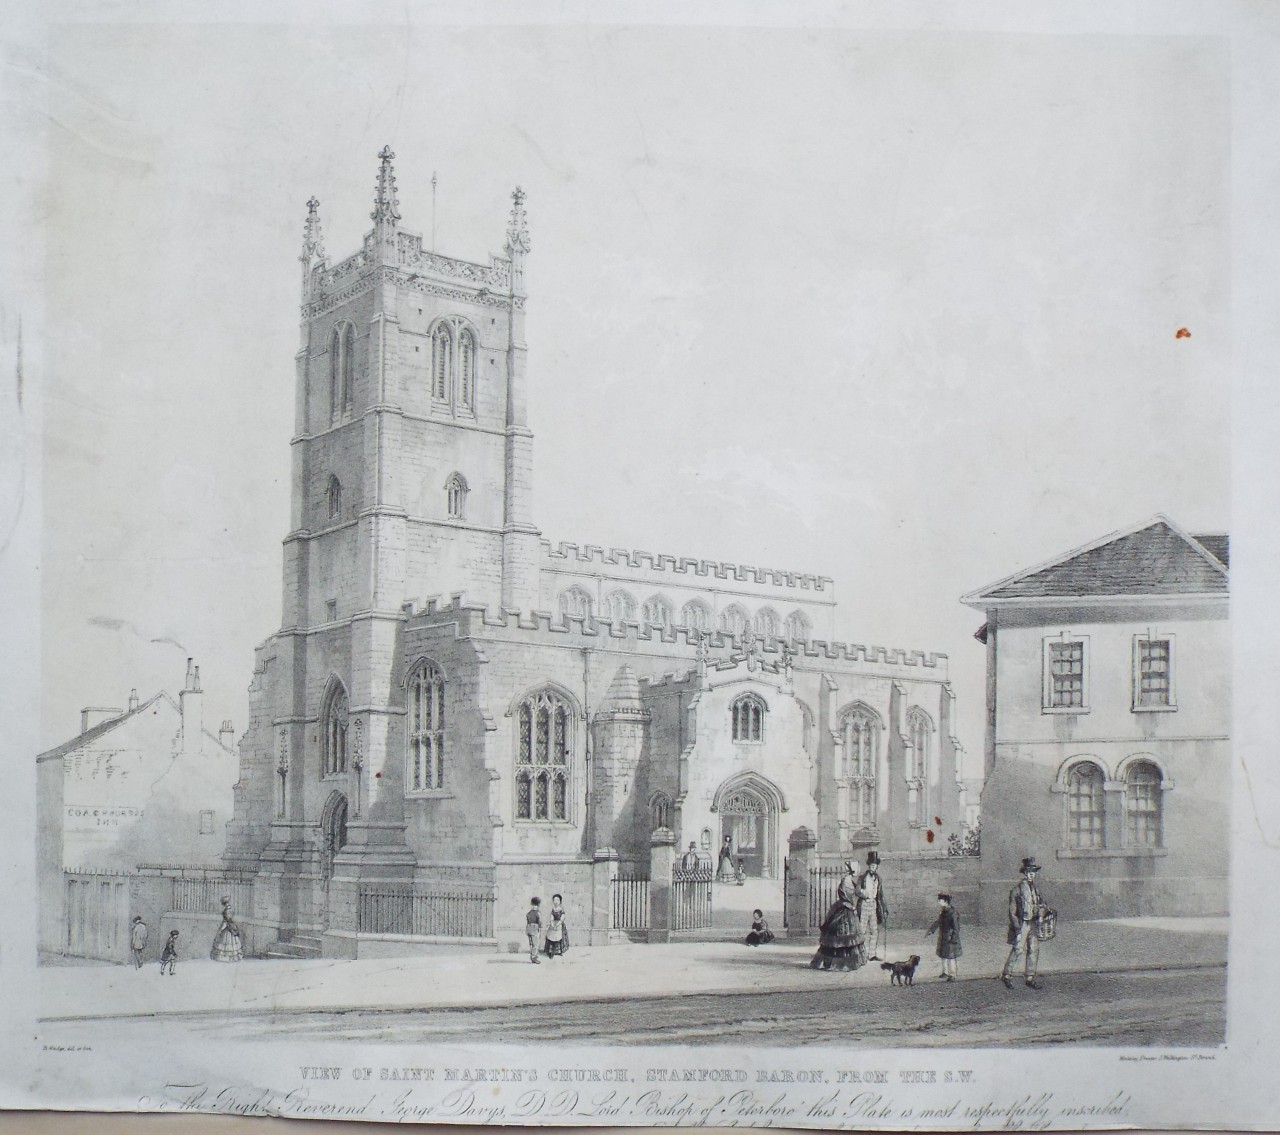 Lithograph - View of Saint Martin's Church, Stamford Baron, from the S.W. - Rudge